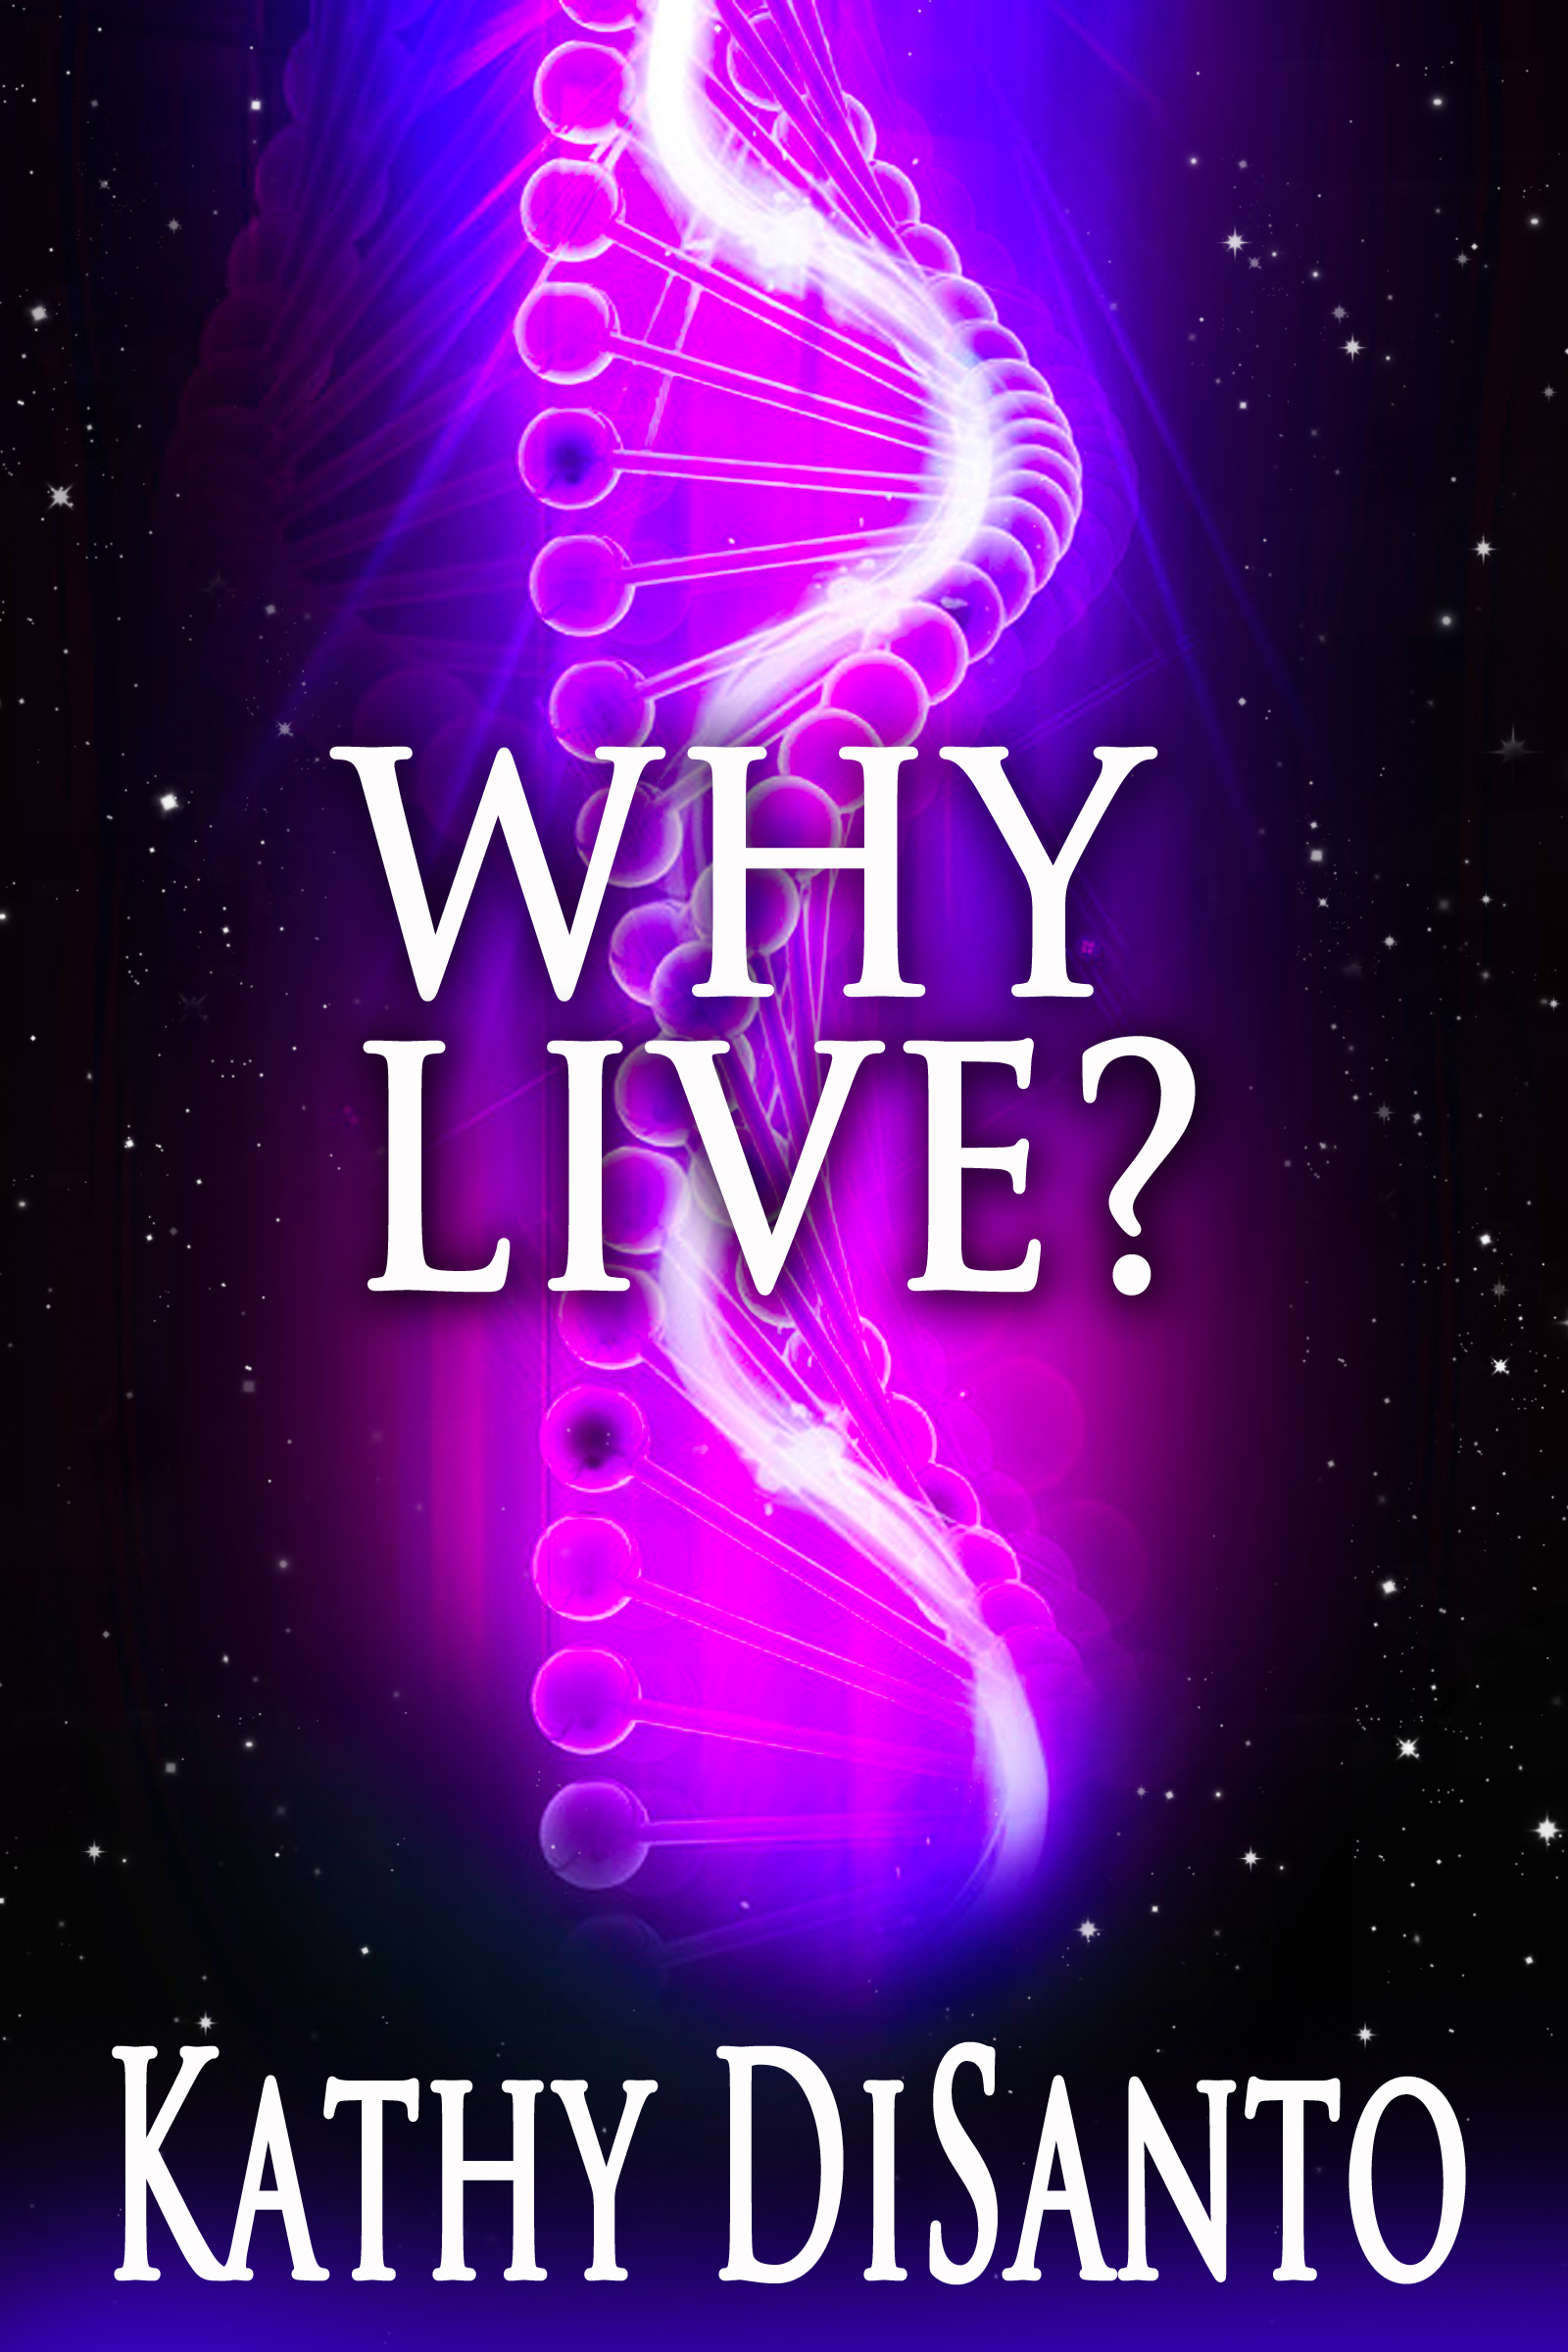 Why Live?